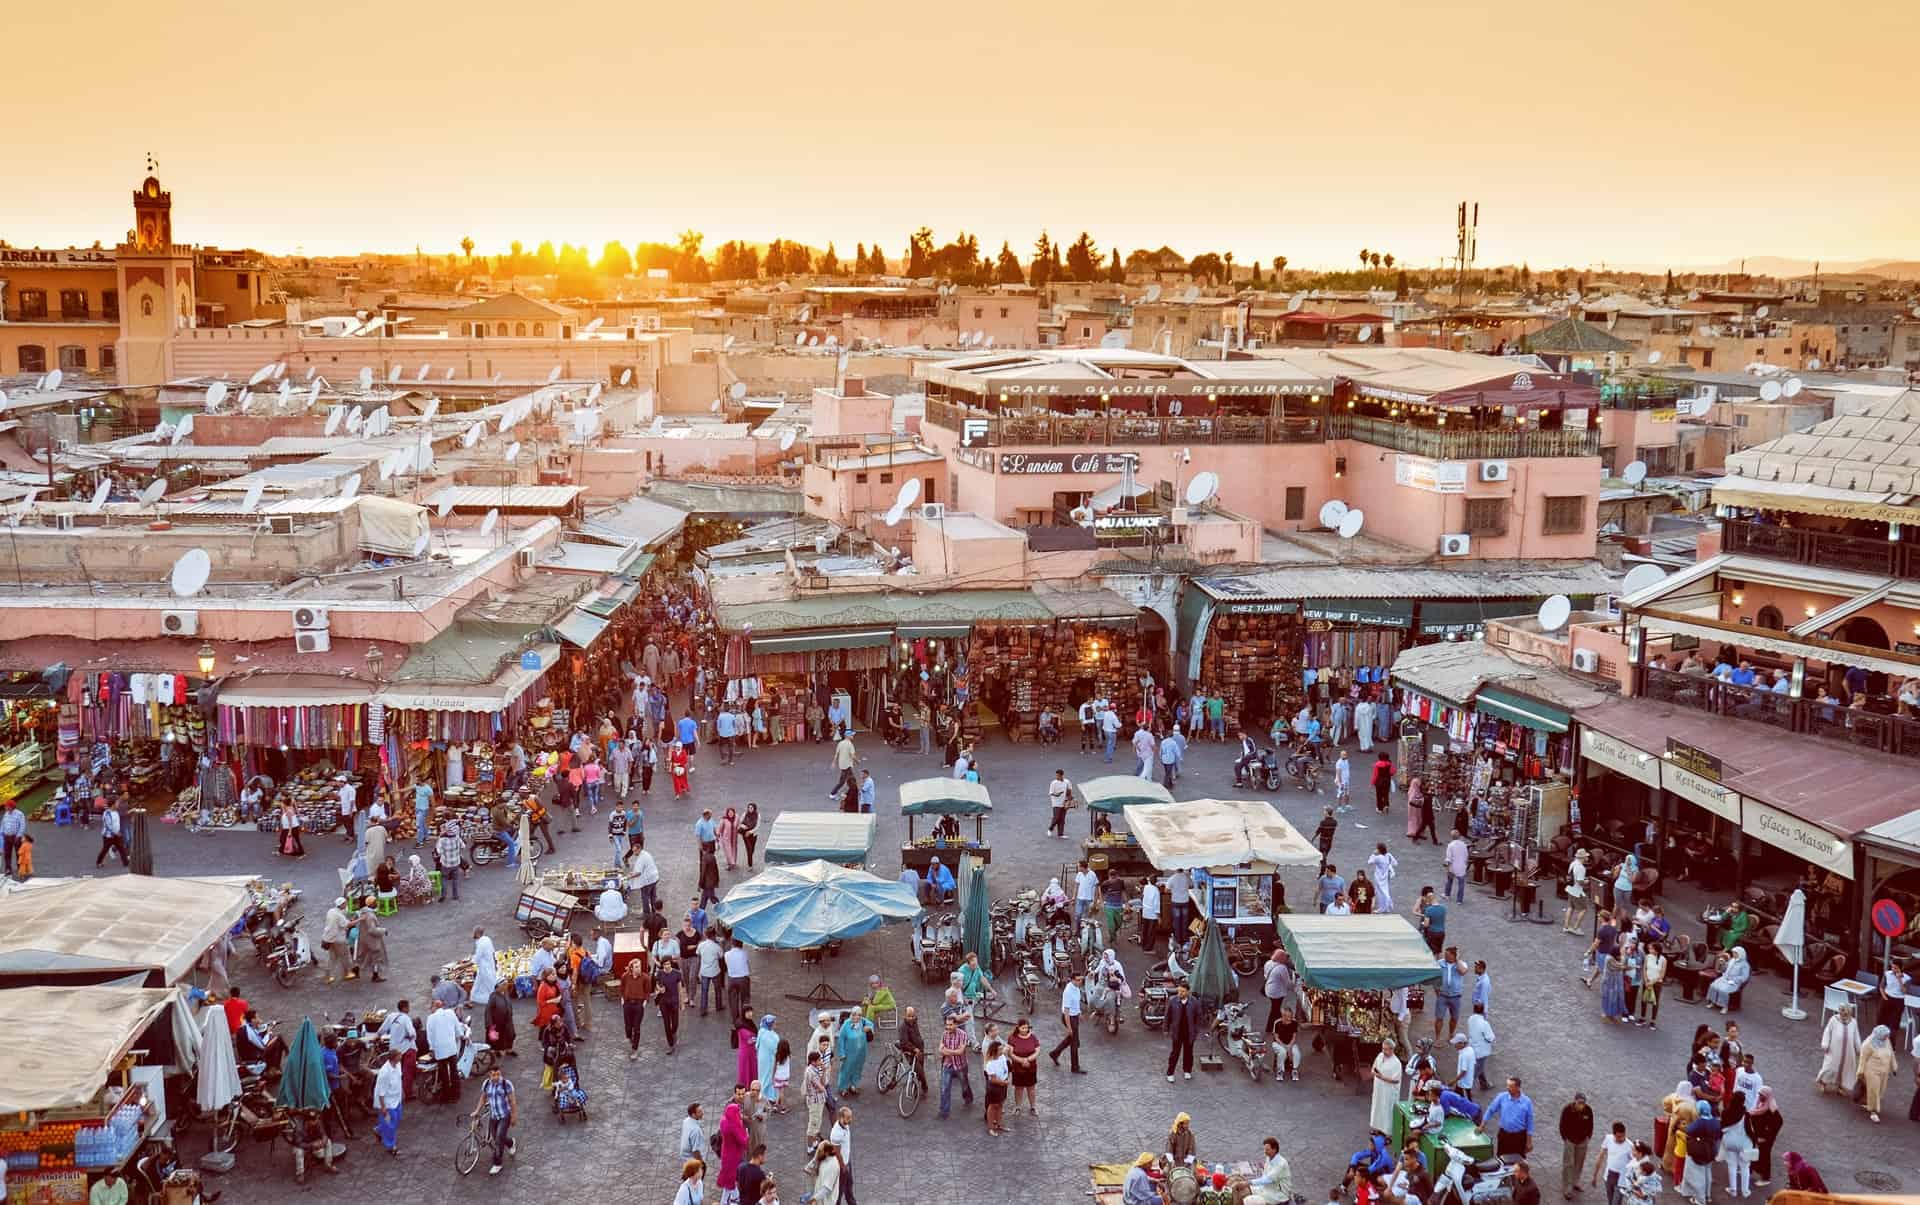 Best things to do in Marrakech Morocco - Daniel and Izdihar Skidmore - Jama el Fna traditional market by Calin Stan on Unsplash